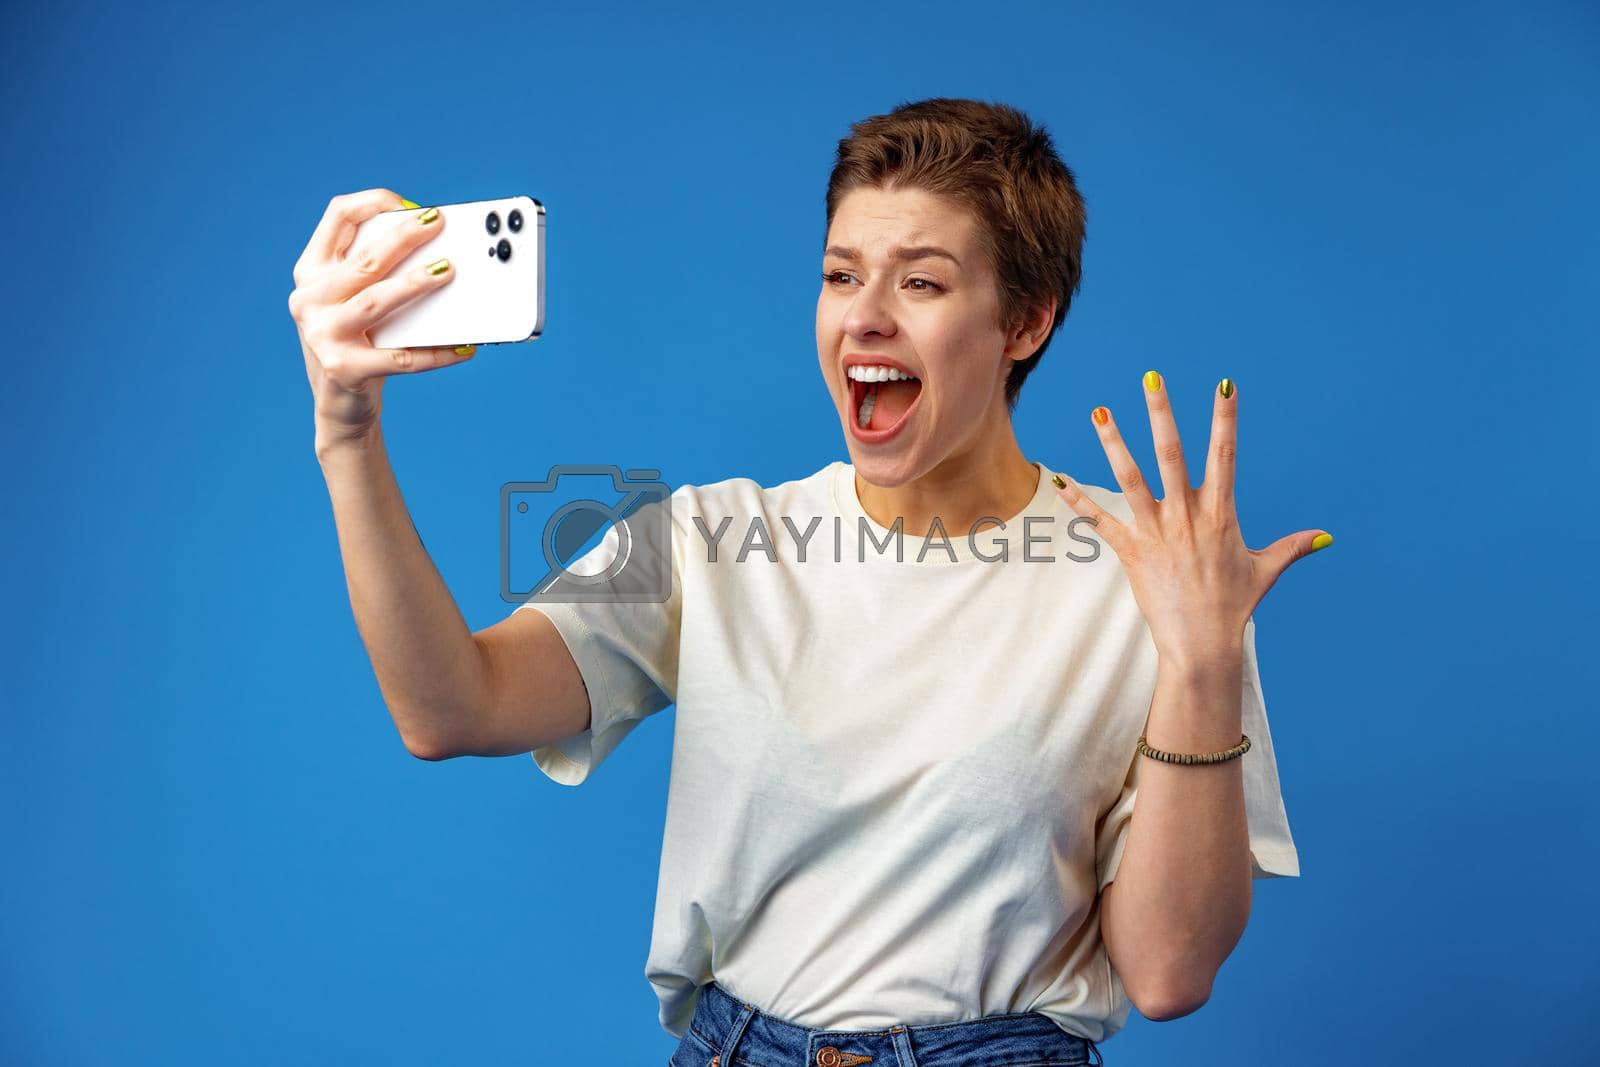 Royalty free image of Shocked girl with short hair looking at phone screen with mouth open over blue background by Fabrikasimf